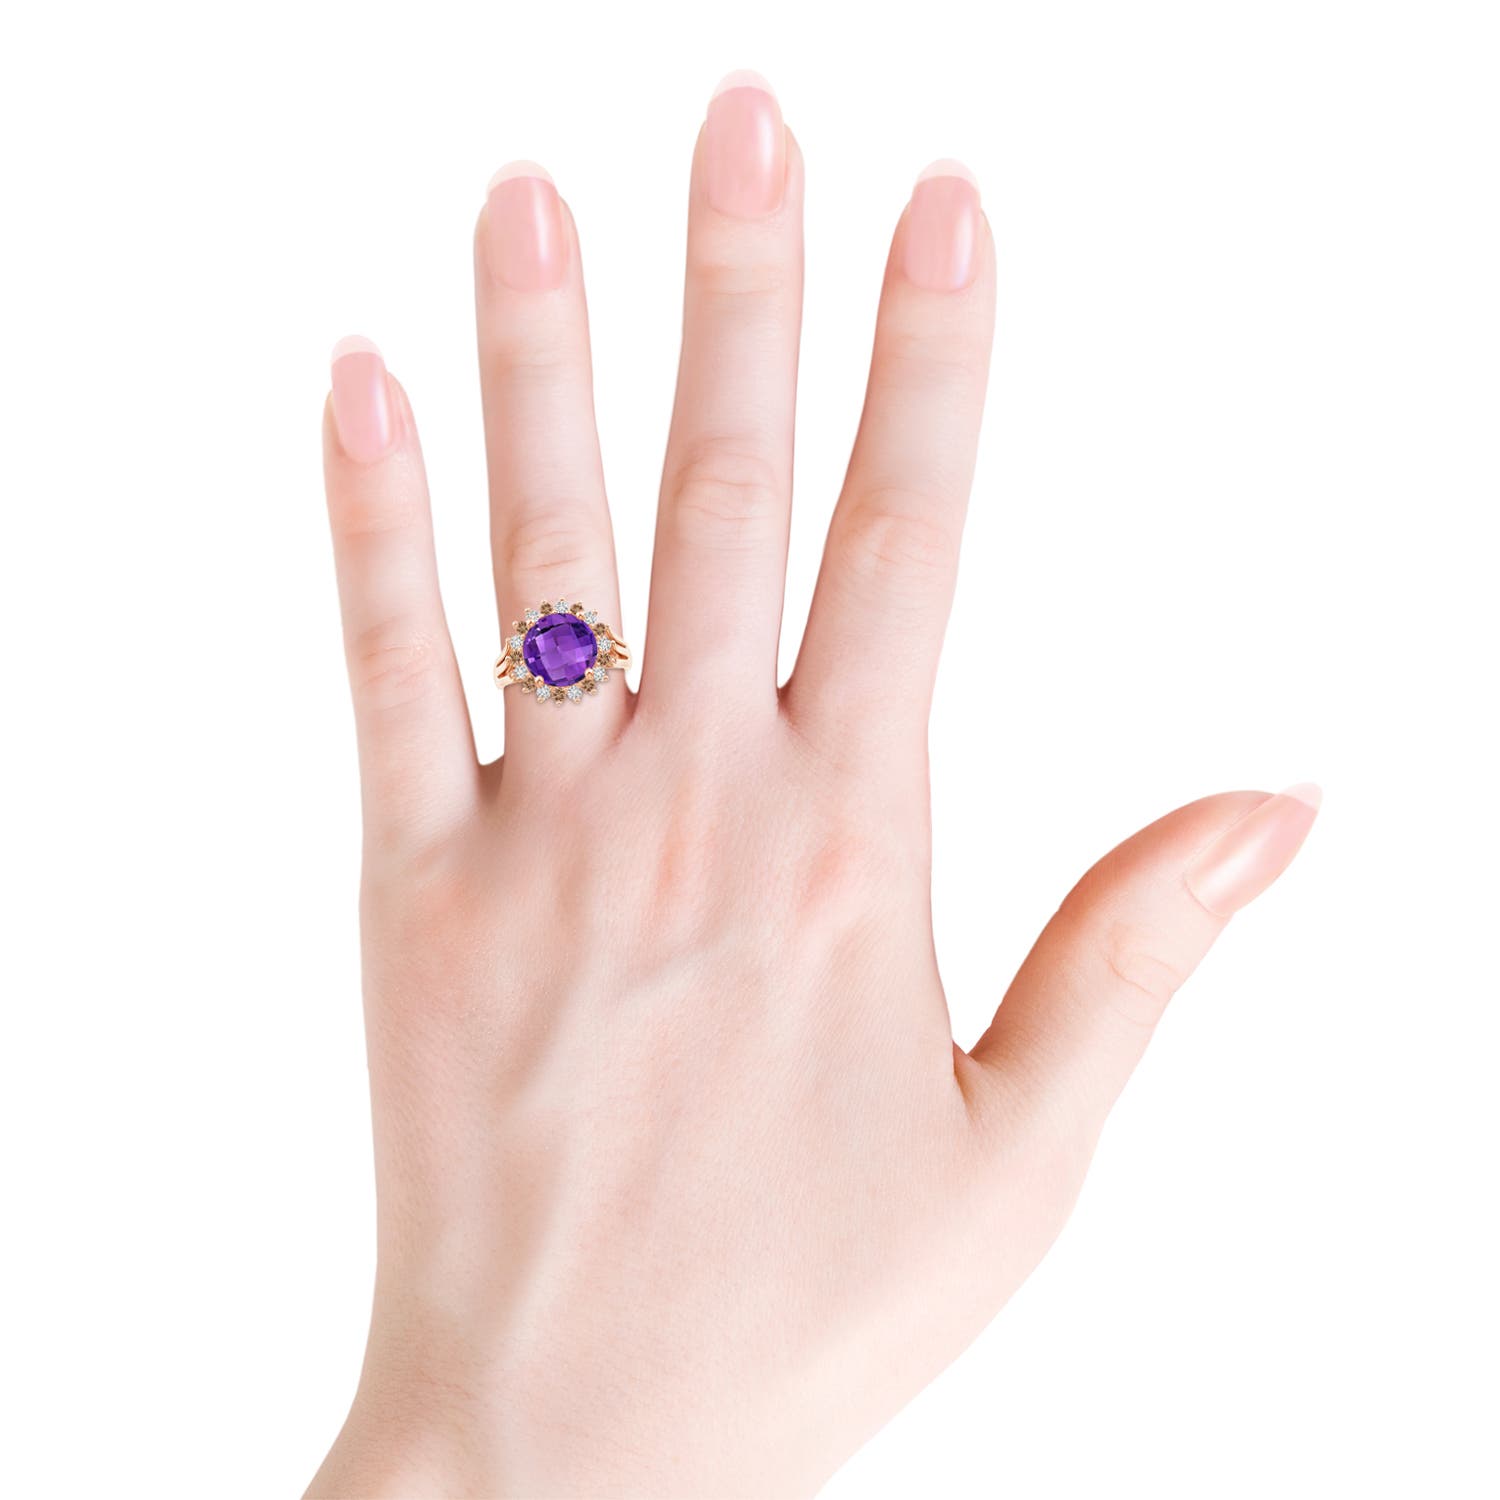 AAA - Amethyst / 4.17 CT / 14 KT Rose Gold